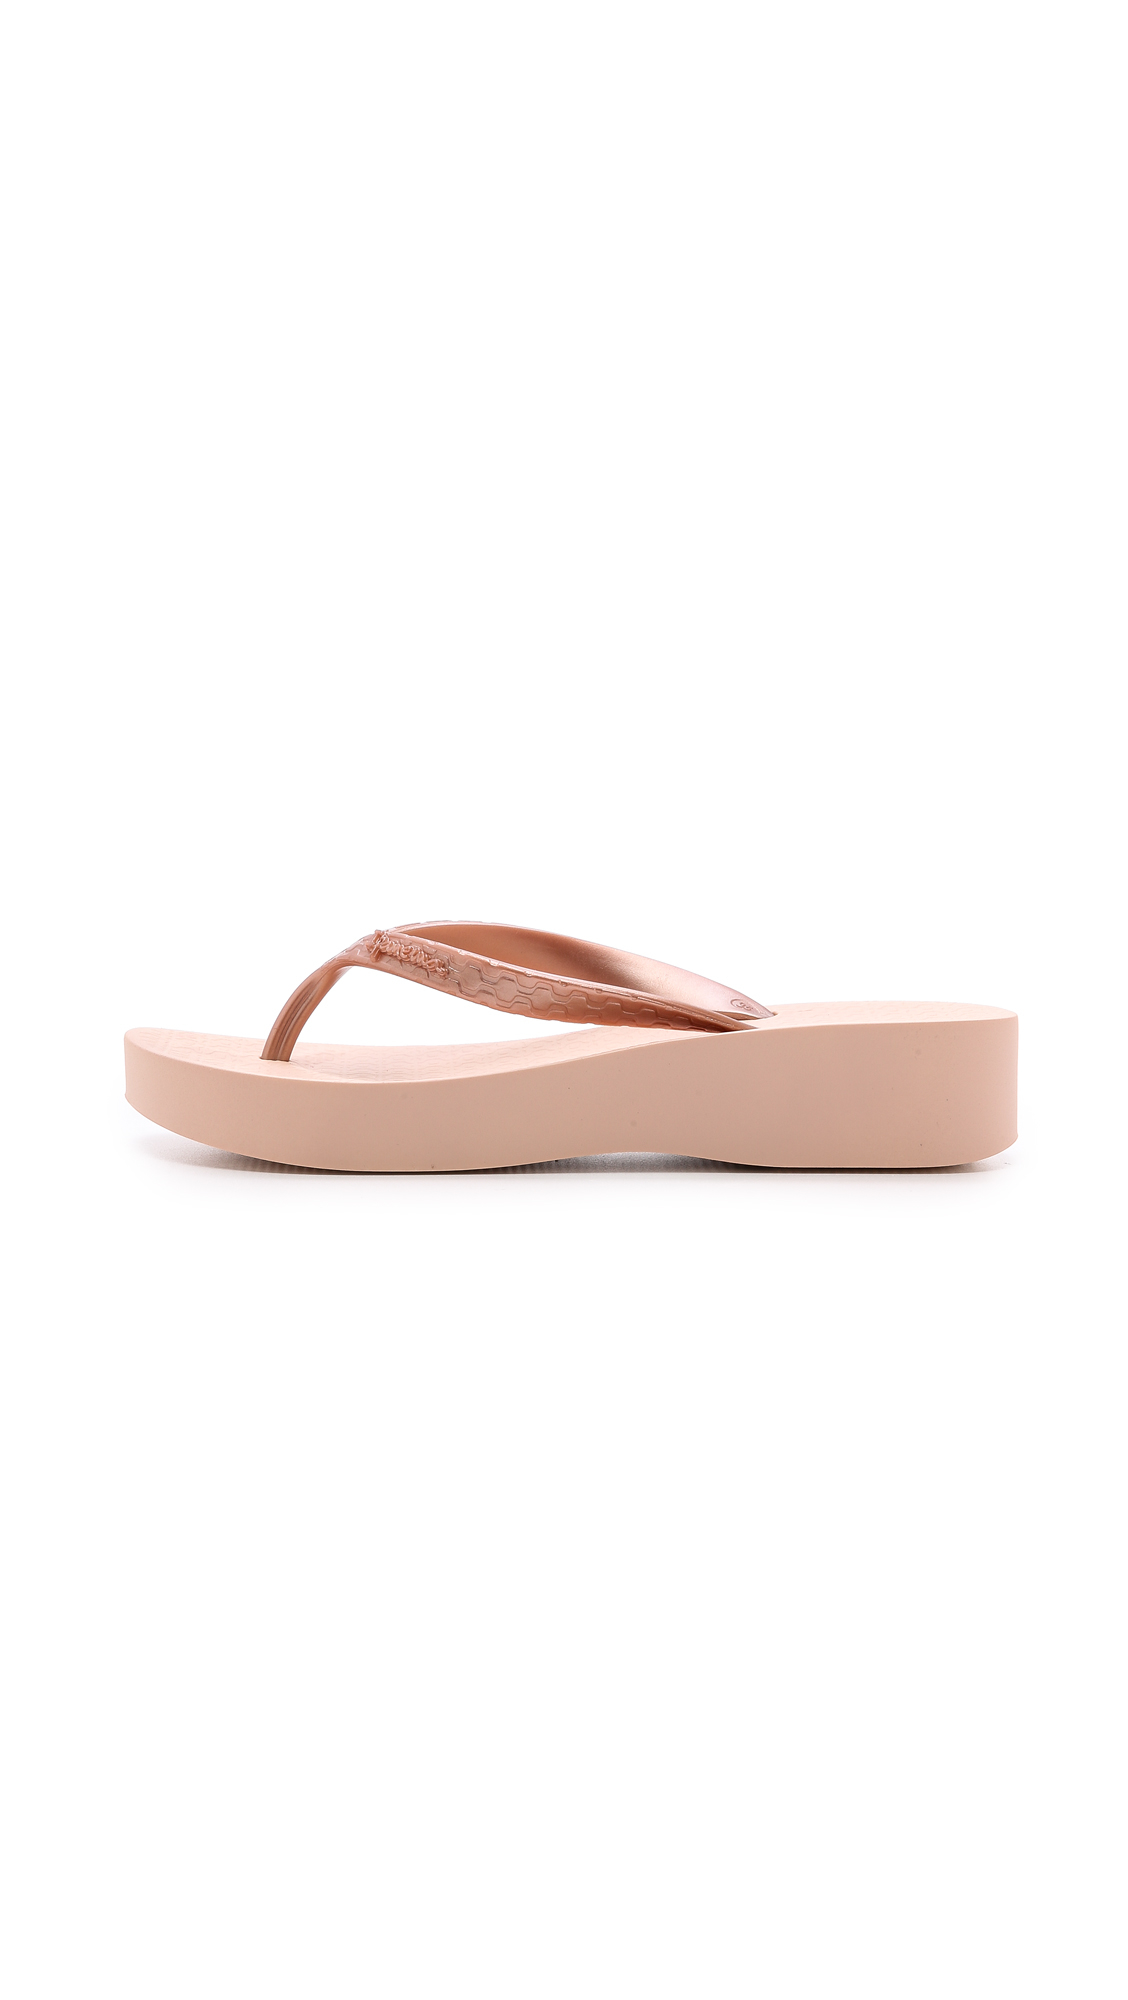 Ipanema Tropical Wedge Flip Flops - Rose Gold in Pink | Lyst